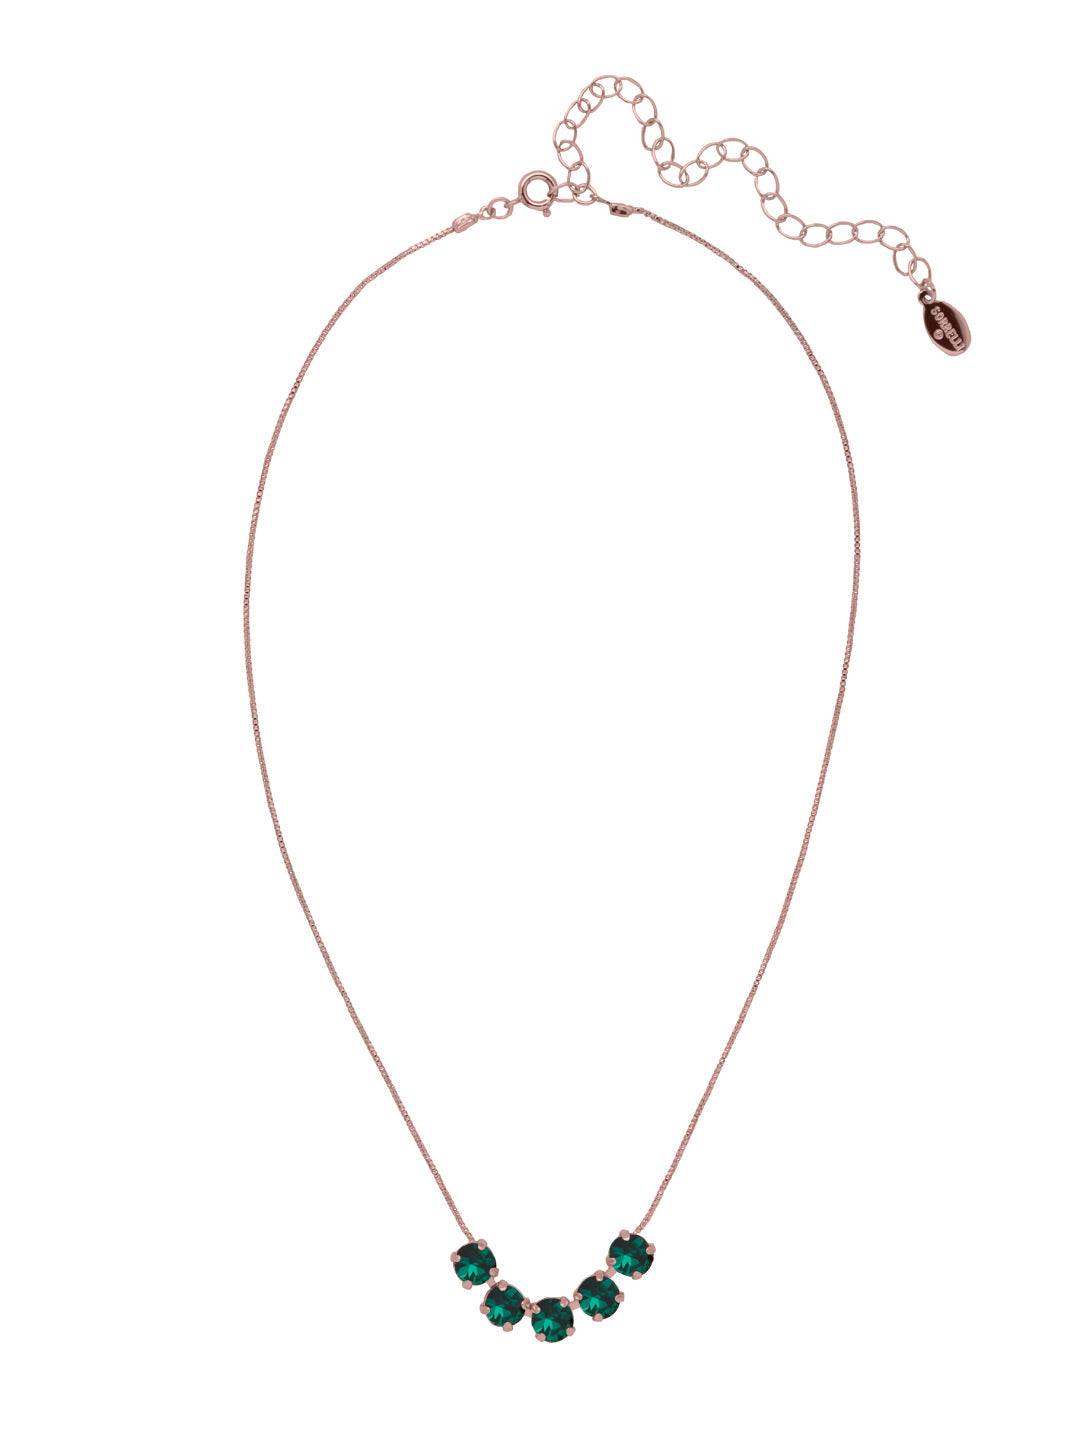 Shaughna Tennis Necklace - NFC84RGEME - <p>The Shaughna Tennis Necklace features five crystals on a delicate adjustable chain. From Sorrelli's Emerald collection in our Rose Gold-tone finish.</p>